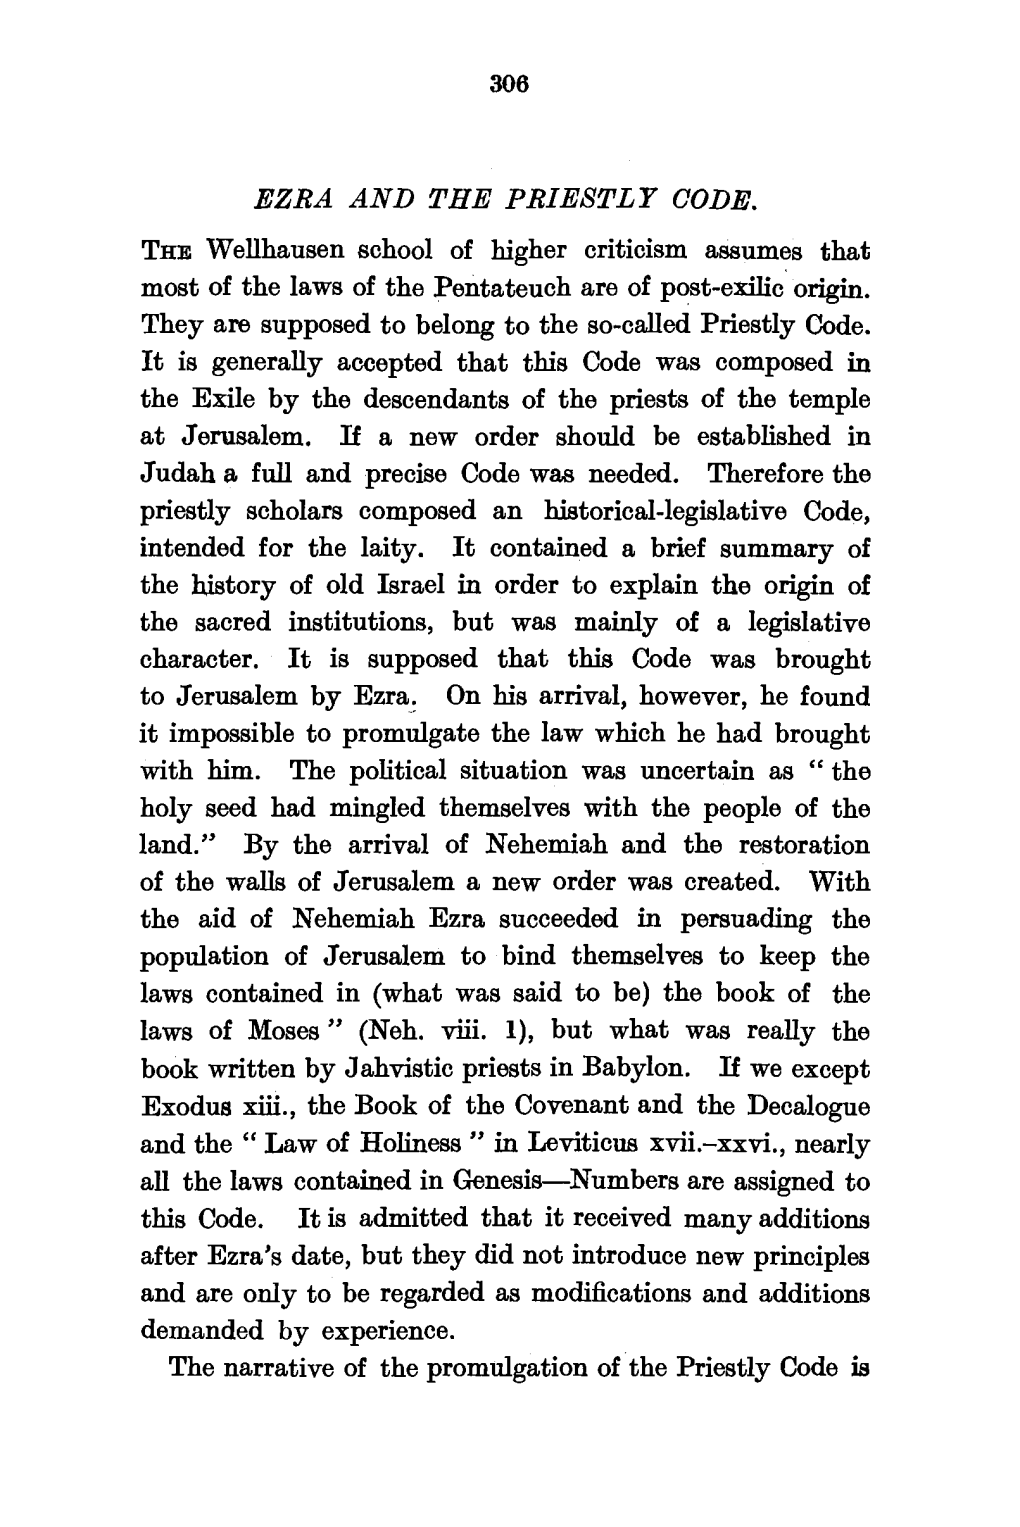 EZRA and the PRIESTLY OODE. the Wellhausen School of Higher Criticism Assumes That Most of the Laws of the Pentateuch Are of Post-Exilic Origin